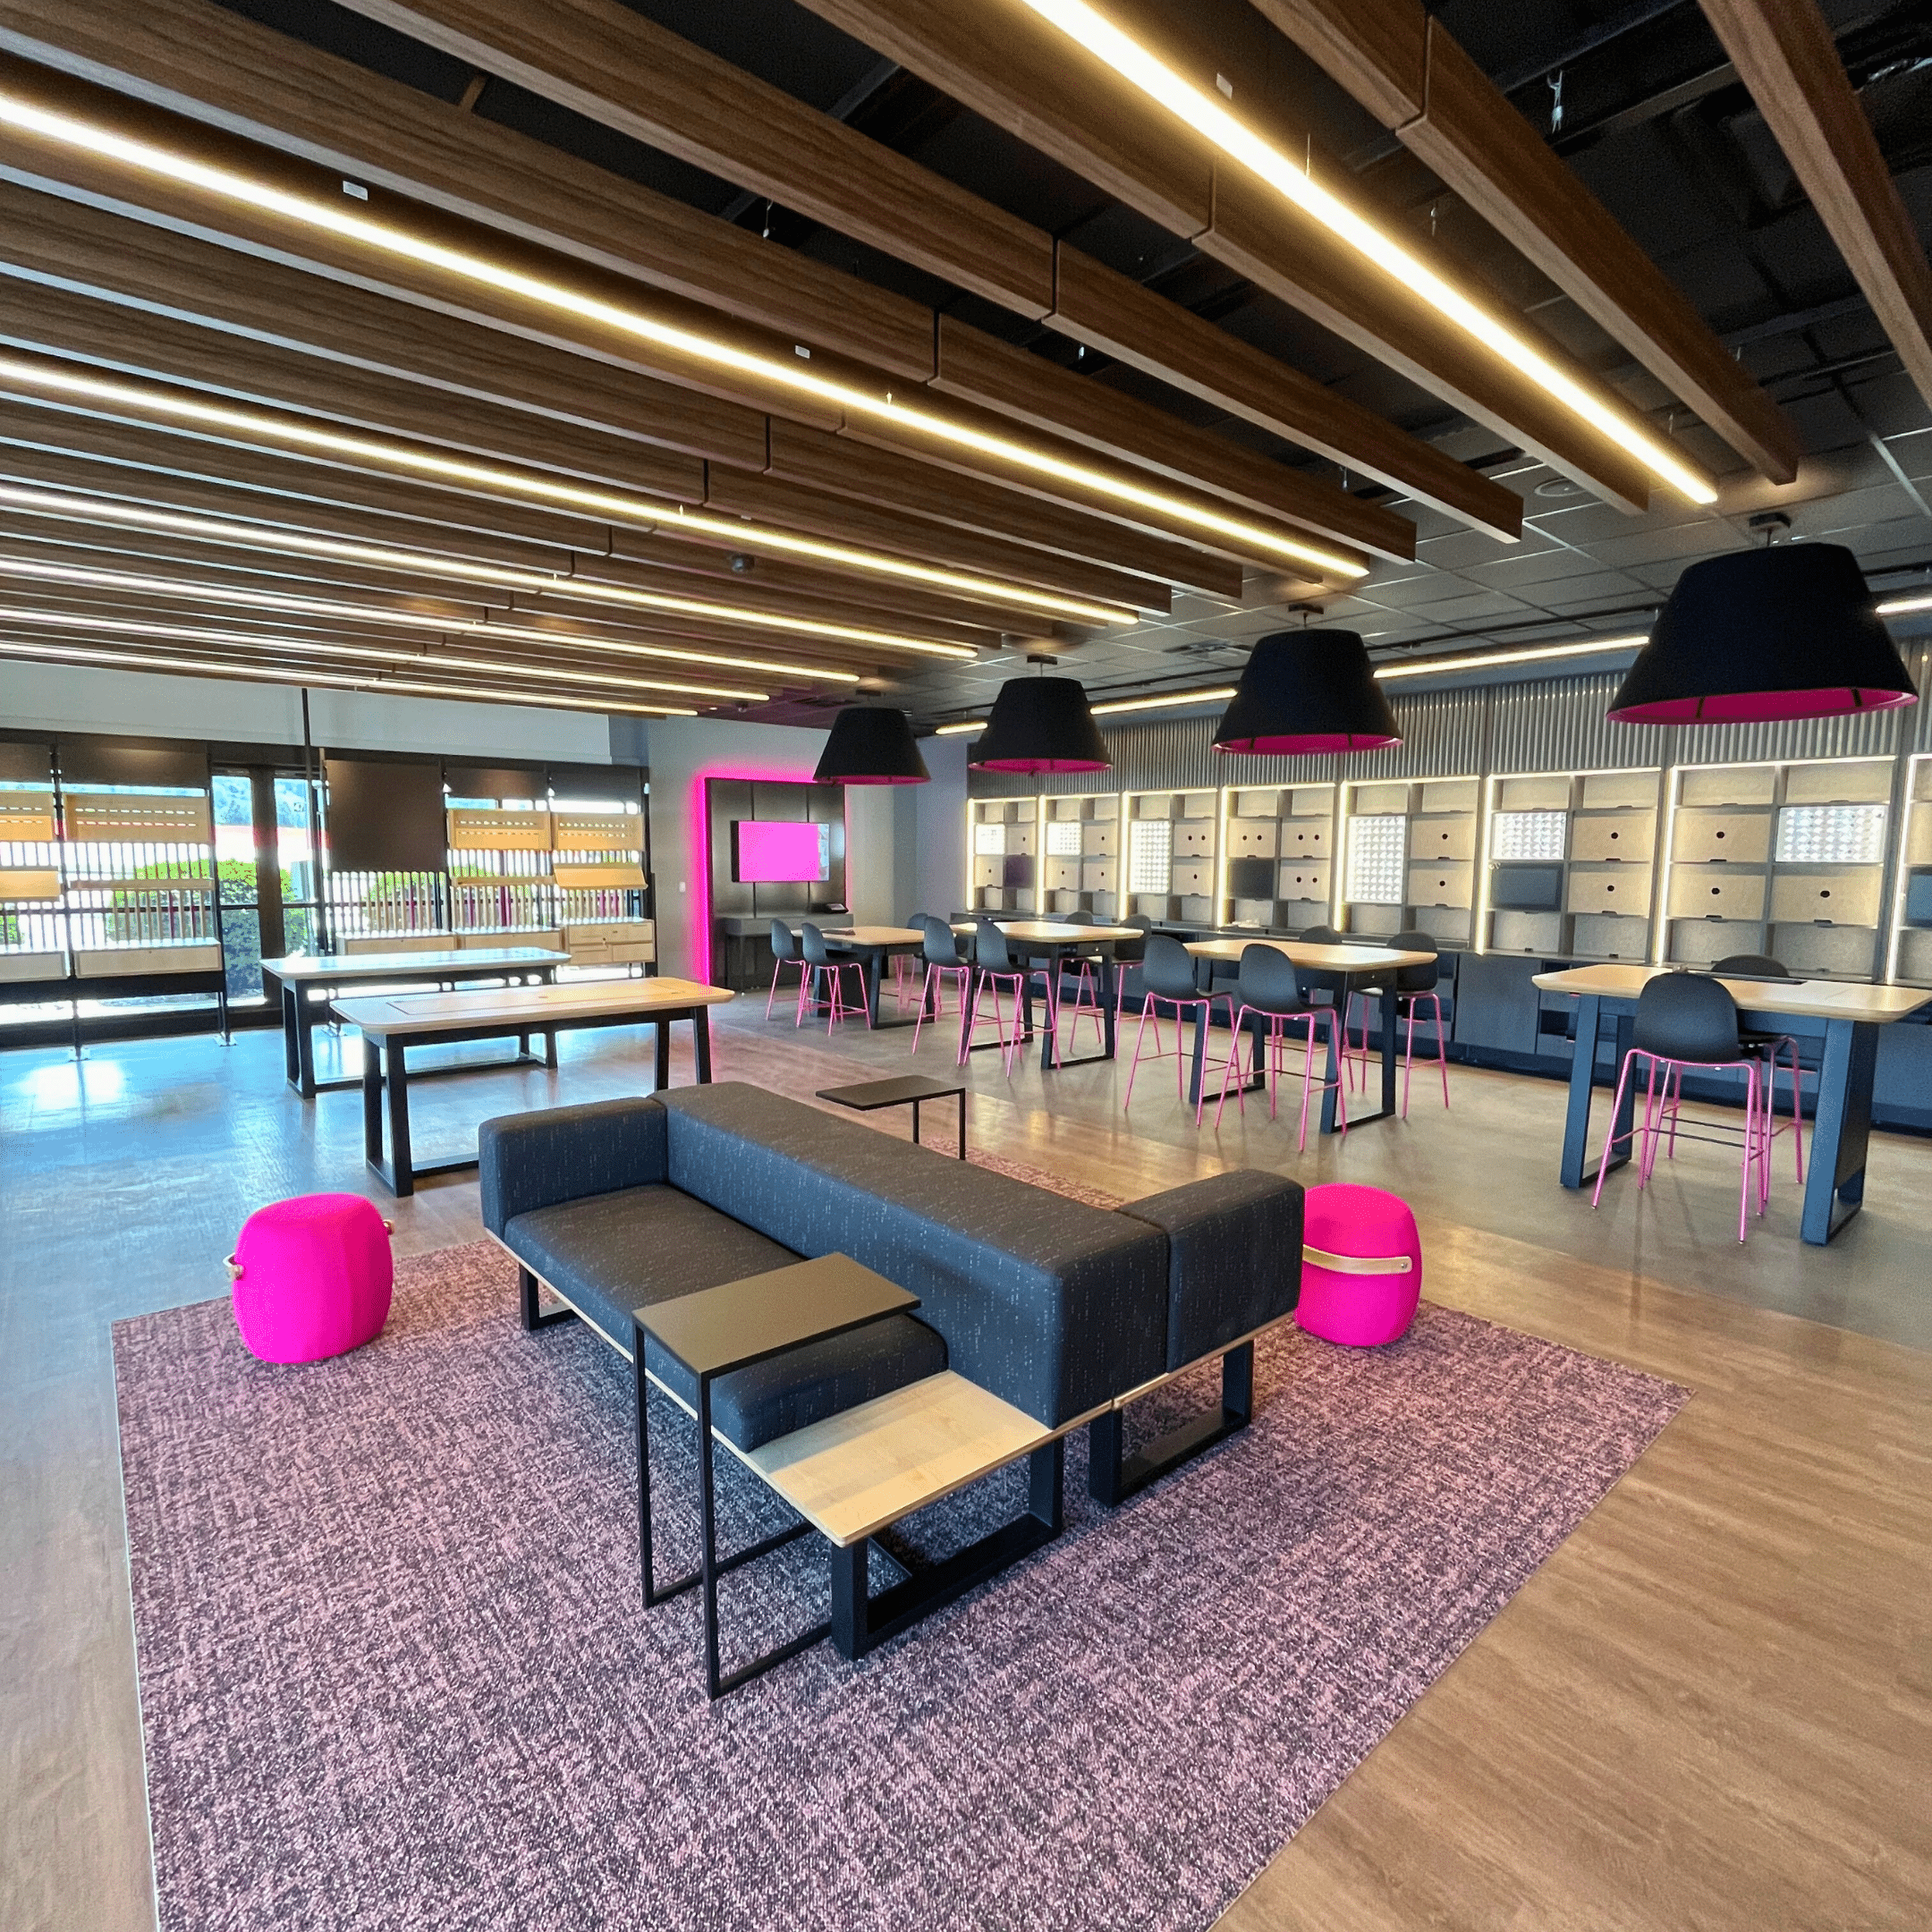 Bright and modern sales area with sleek fixtures, interactive displays, and comfortable seating at the T-Mobile Experiential Store.